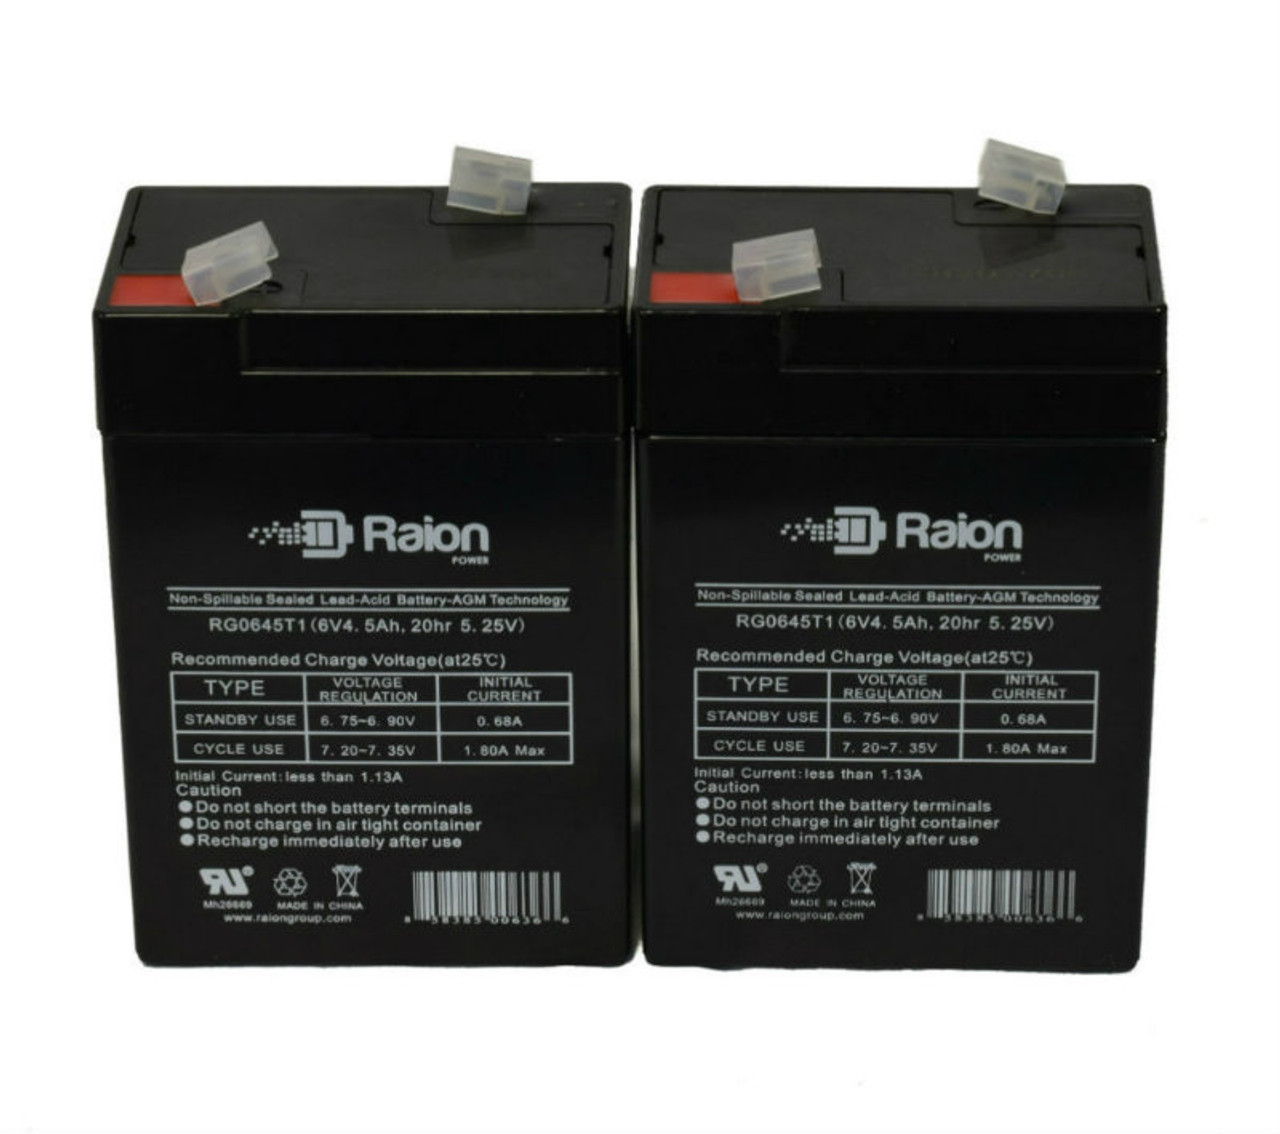 Raion Power 6V 4.5Ah Replacement Emergency Light Battery for Sure-Lites 0262 - 2 Pack